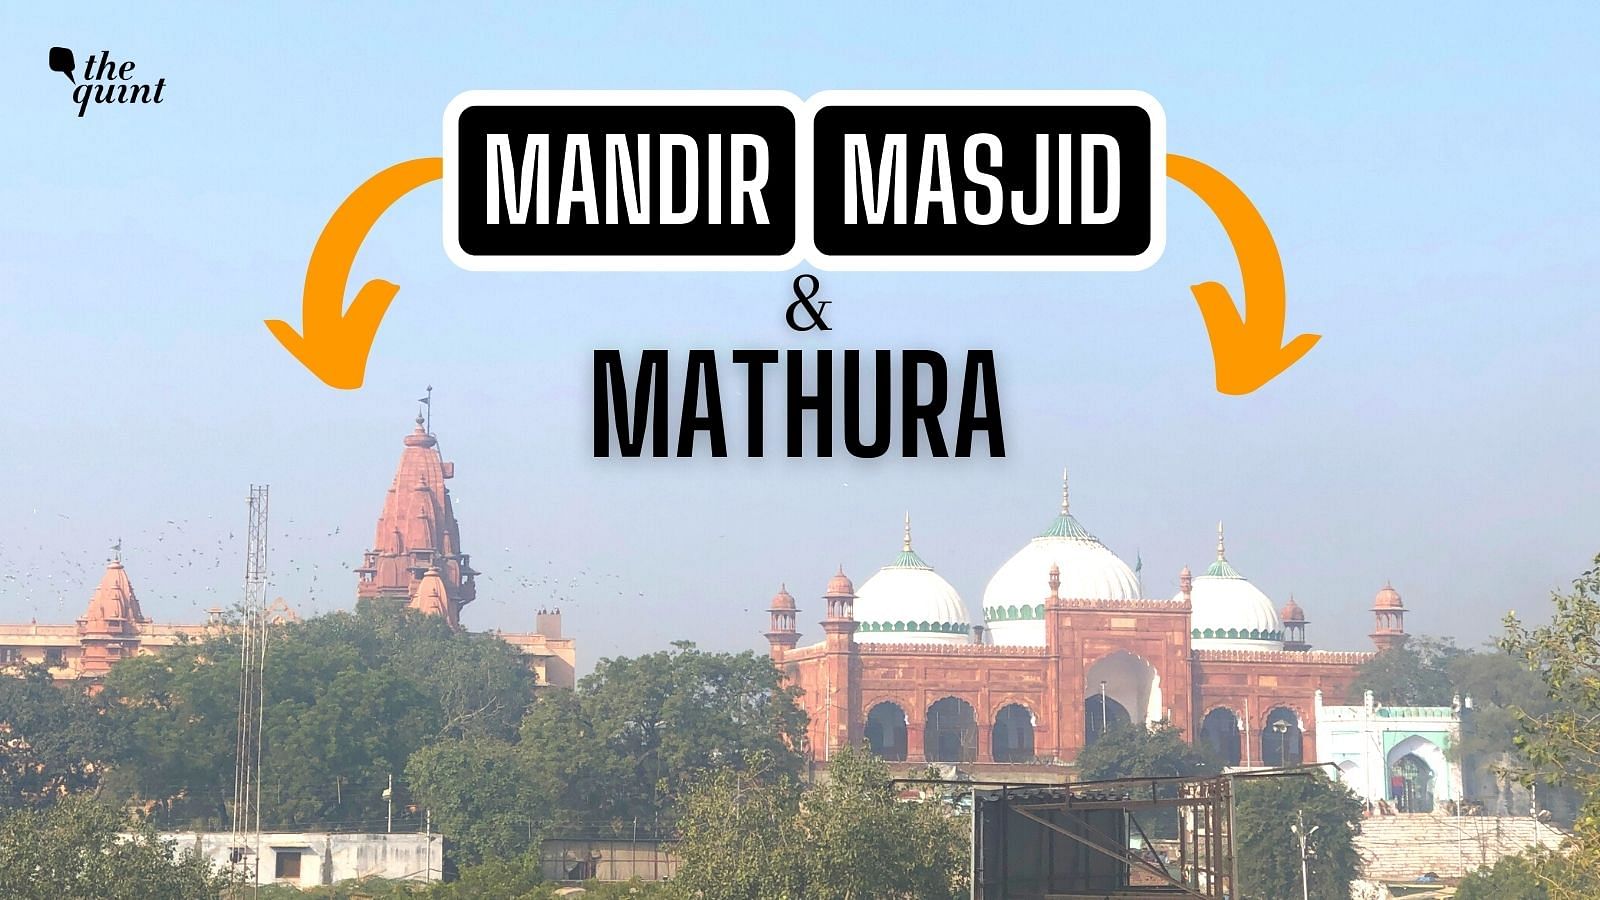 <div class="paragraphs"><p>How do local residents view the efforts to deepen a mandir-masjid dispute in Mathura?</p></div>